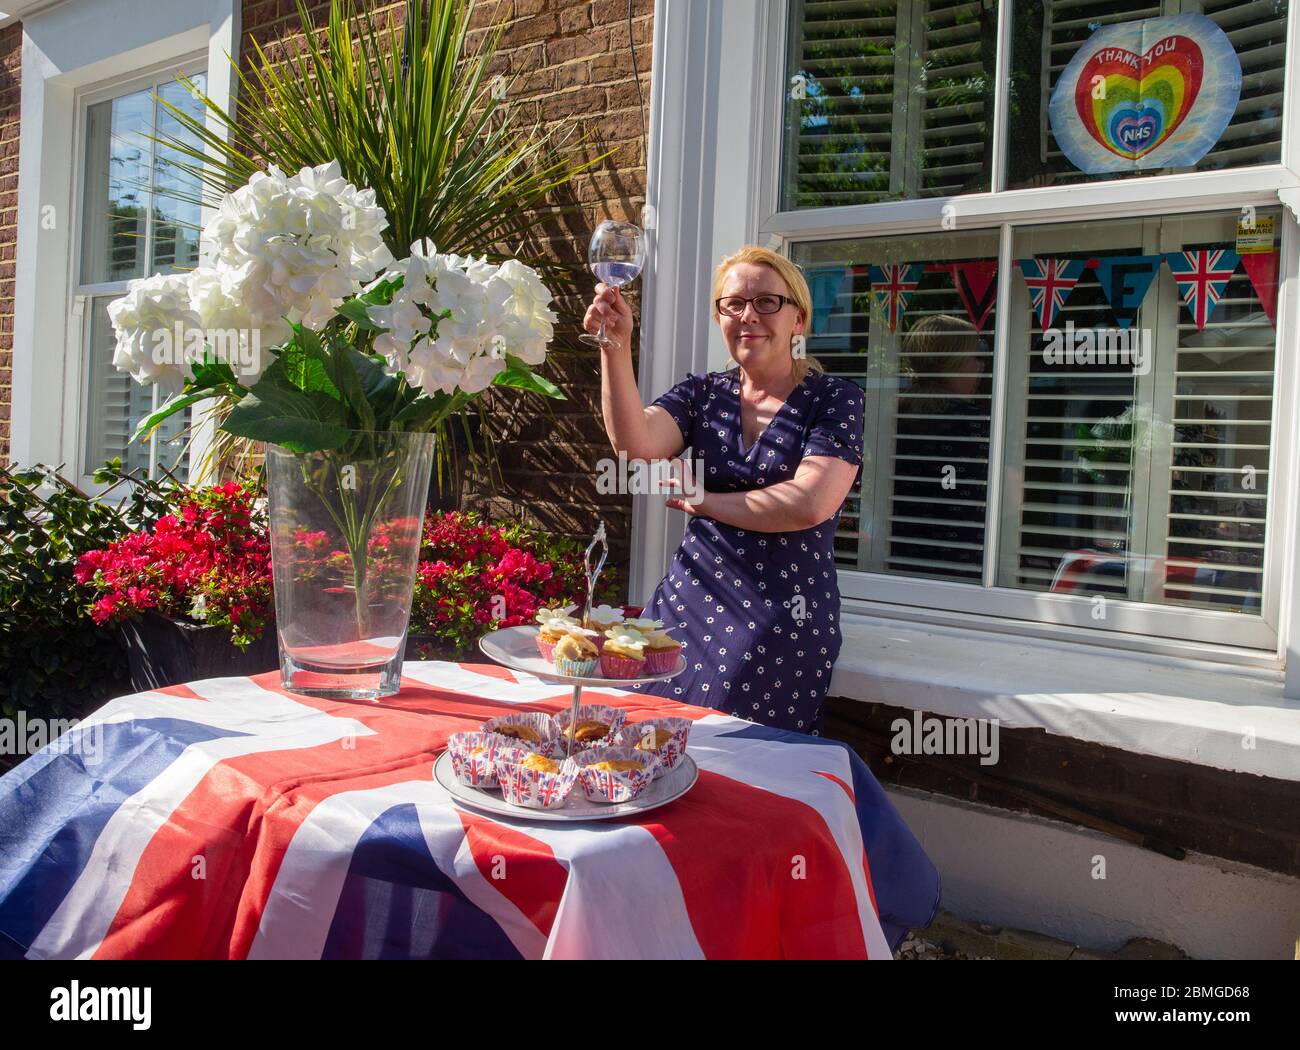 A resident in West London celebrates the 75th anniversary of VE day. Victory in Europe day was May 8th 1945 when the second World War ended. Stock Photo